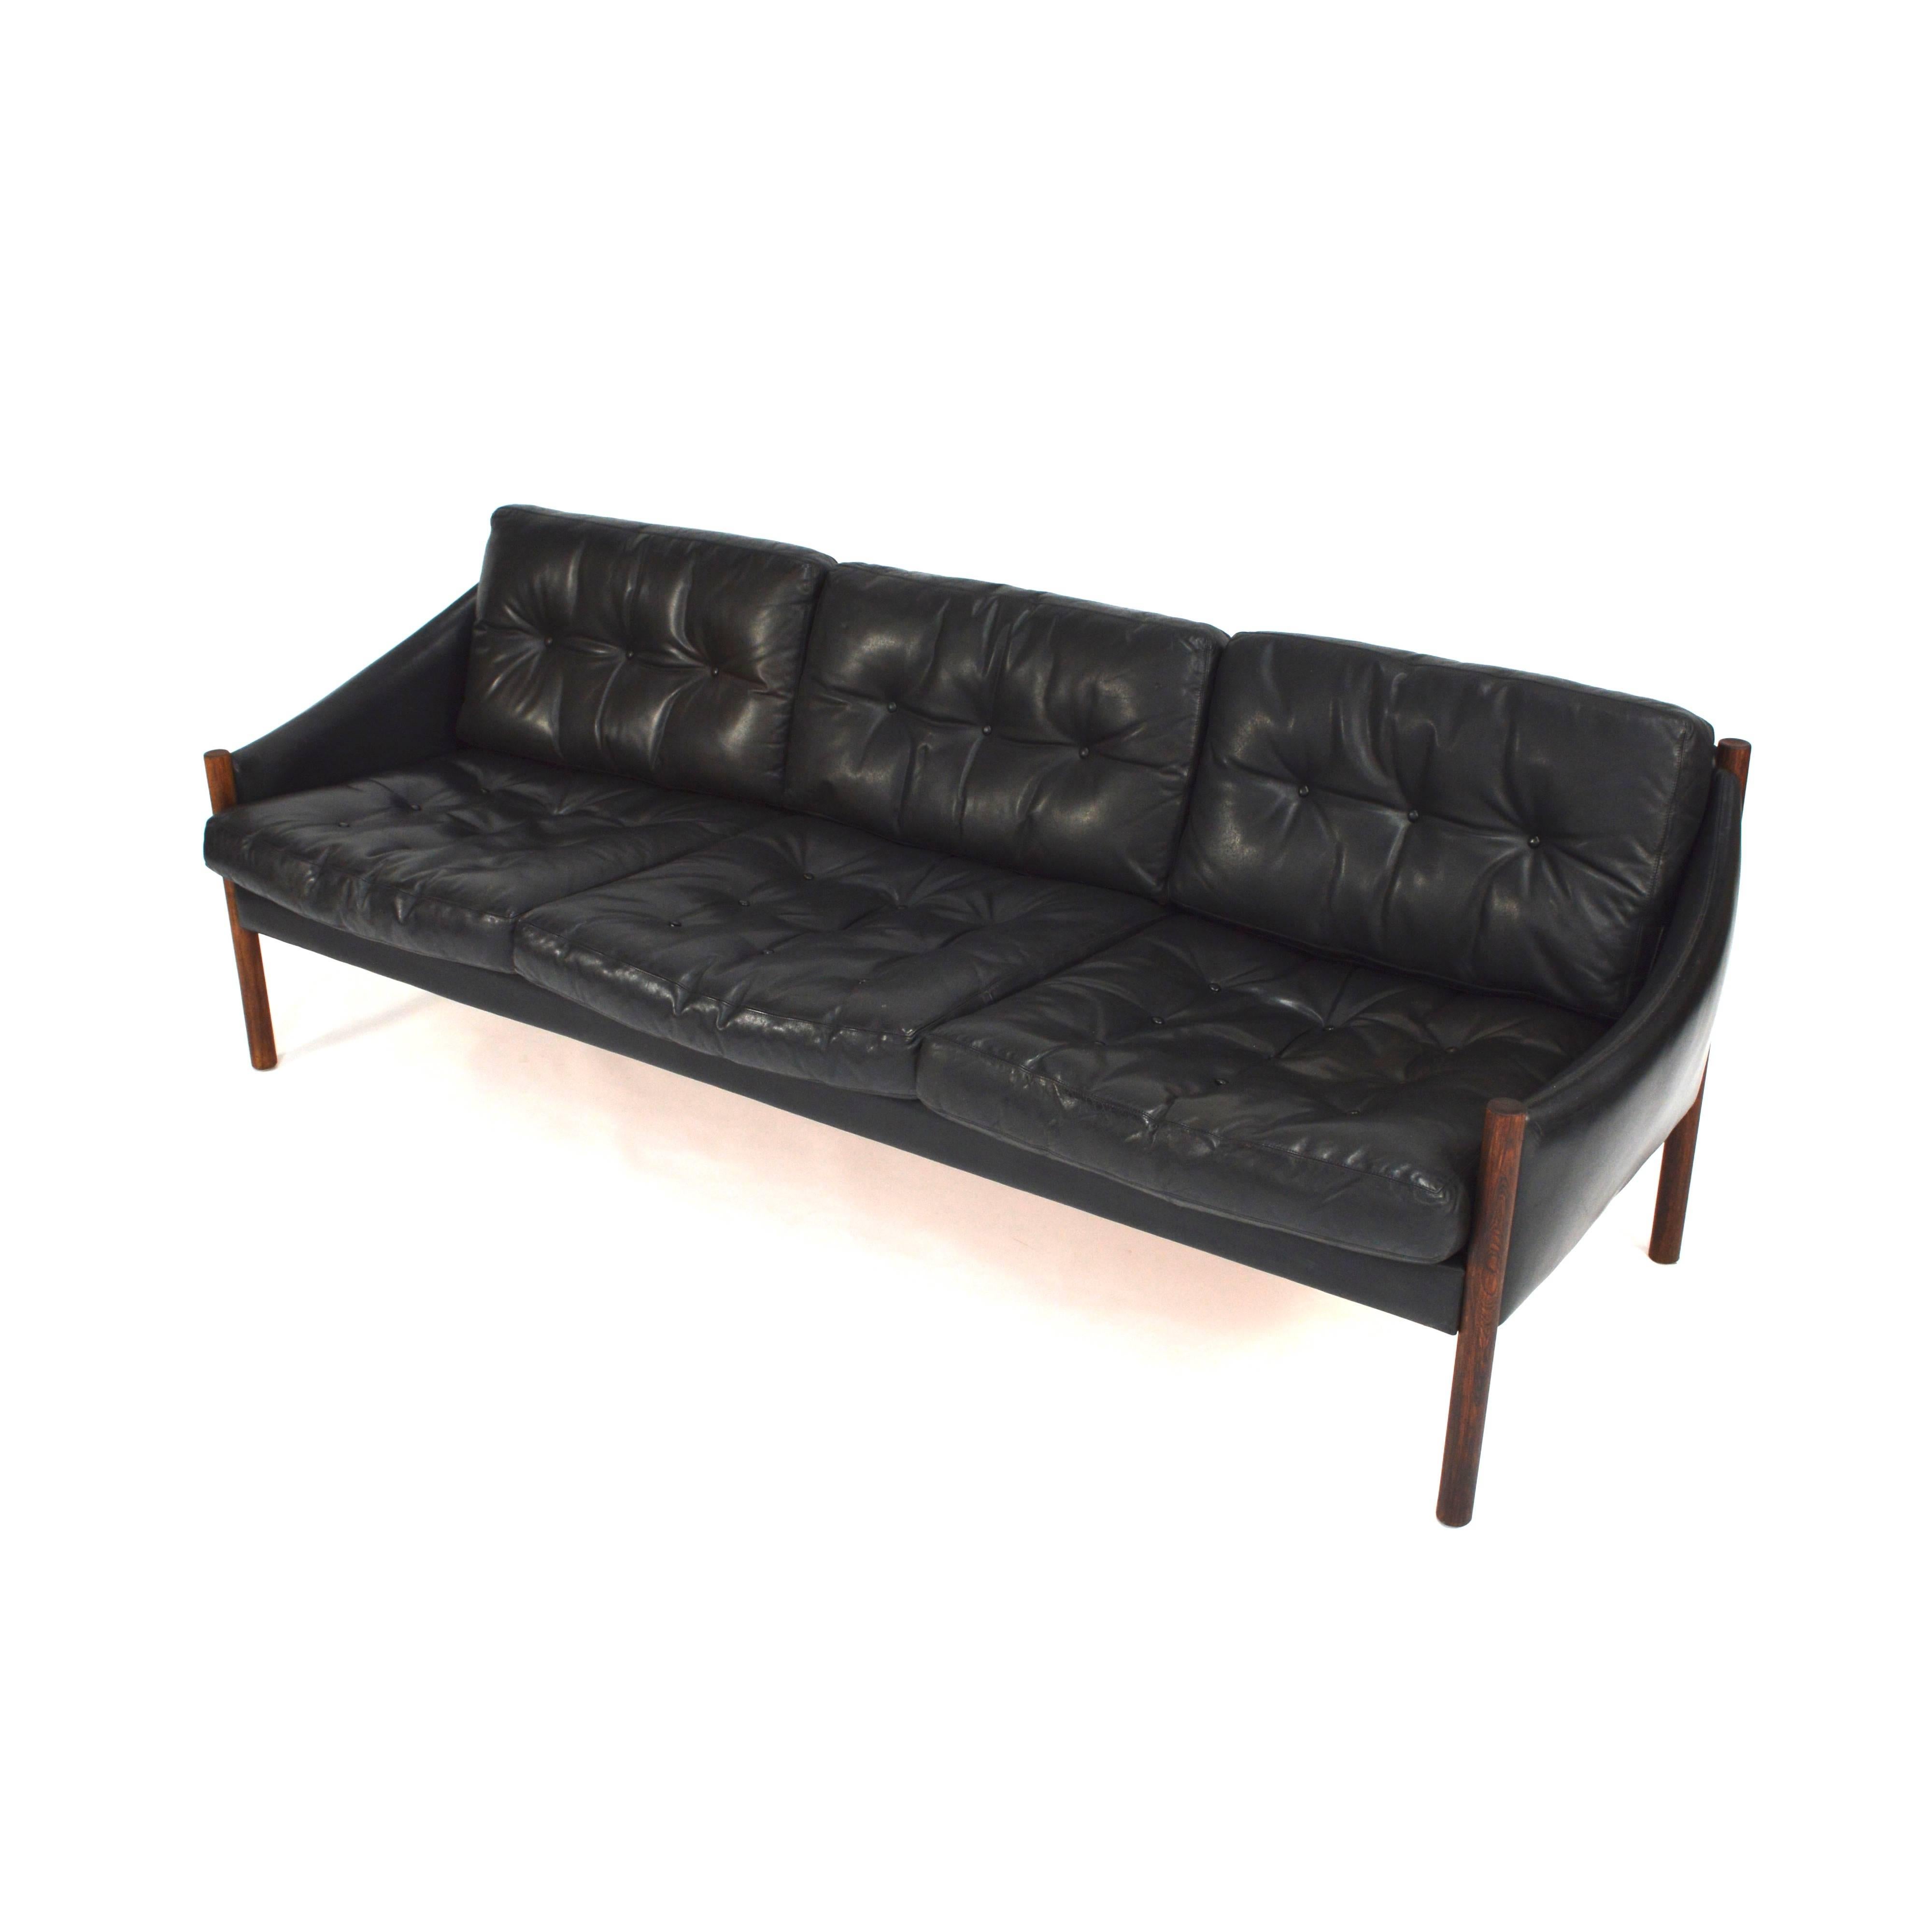 Scandinavian Modern Arne Norell Attributed, Three-Seat Sofa in Black Leather and Rosewood, 1960s